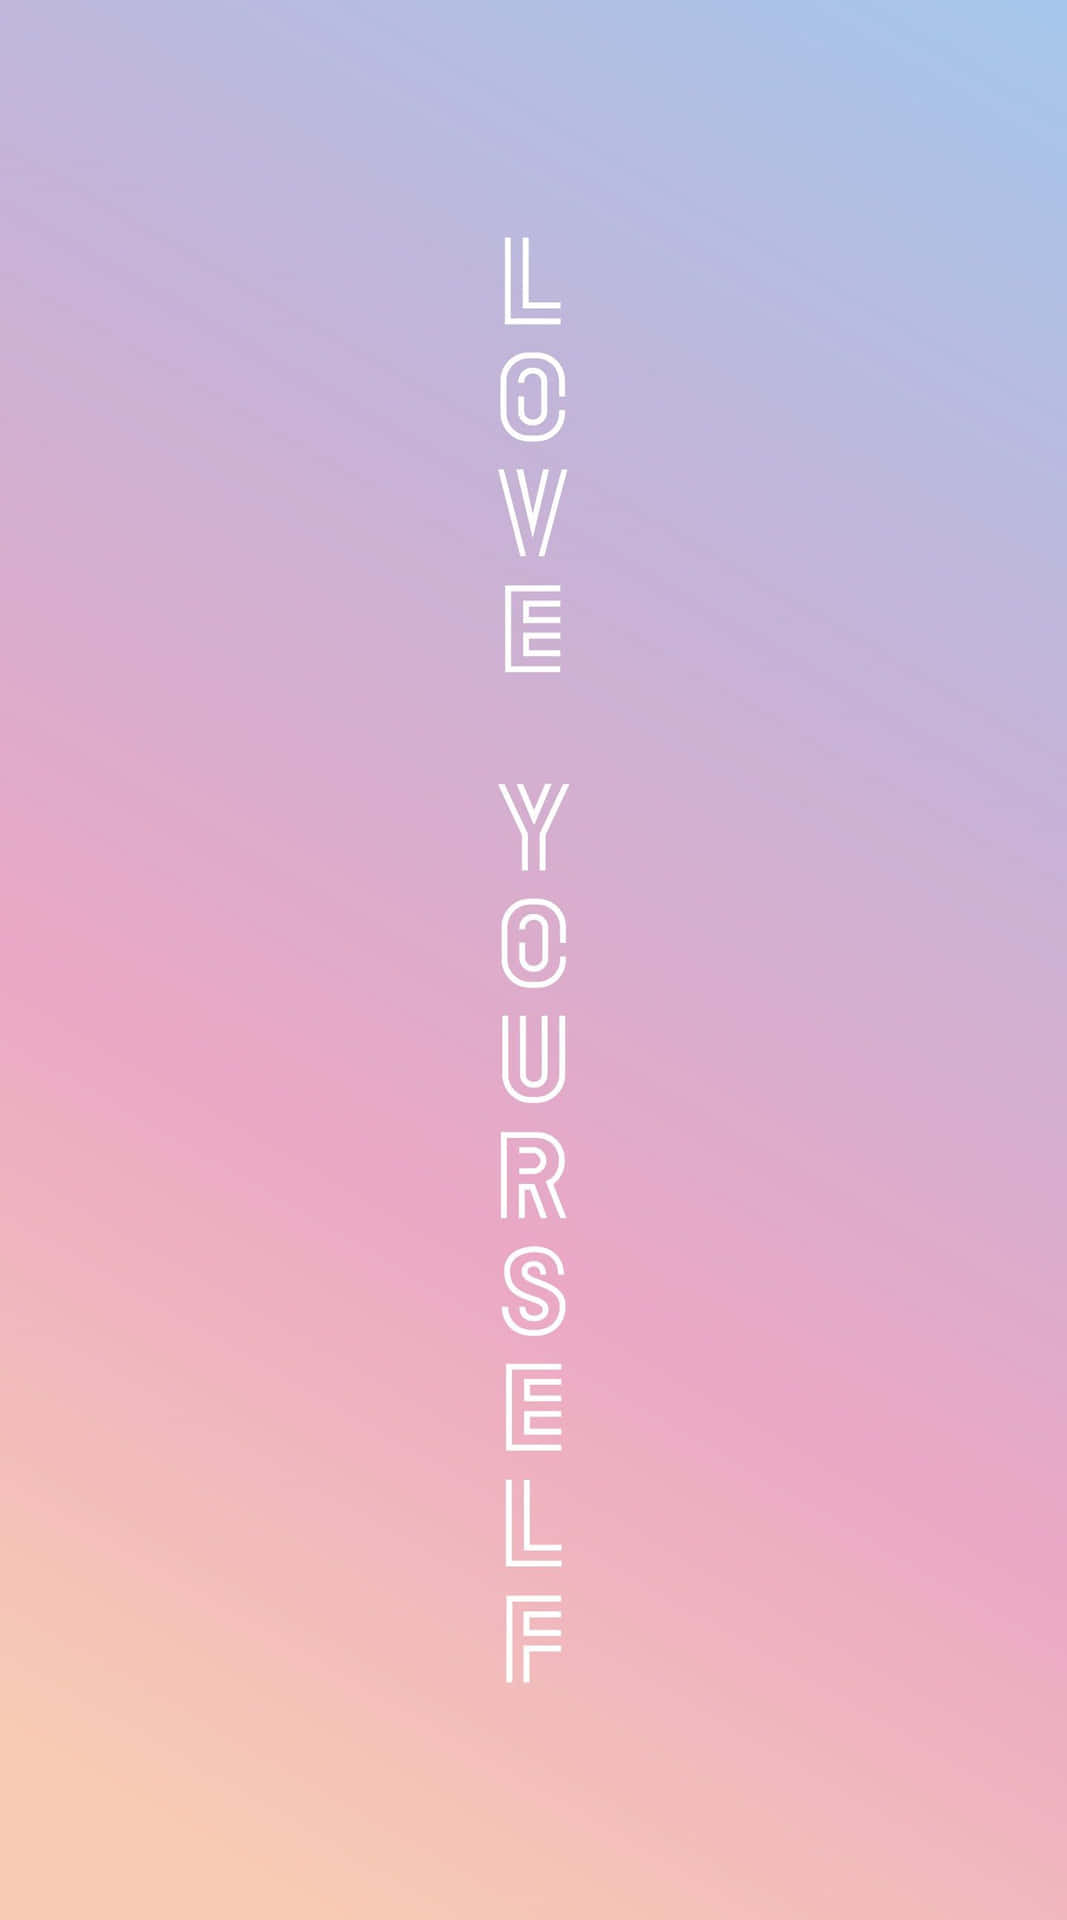 BTS Love Yourself Wallpaper: Inspirational and Vibrant Wallpaper